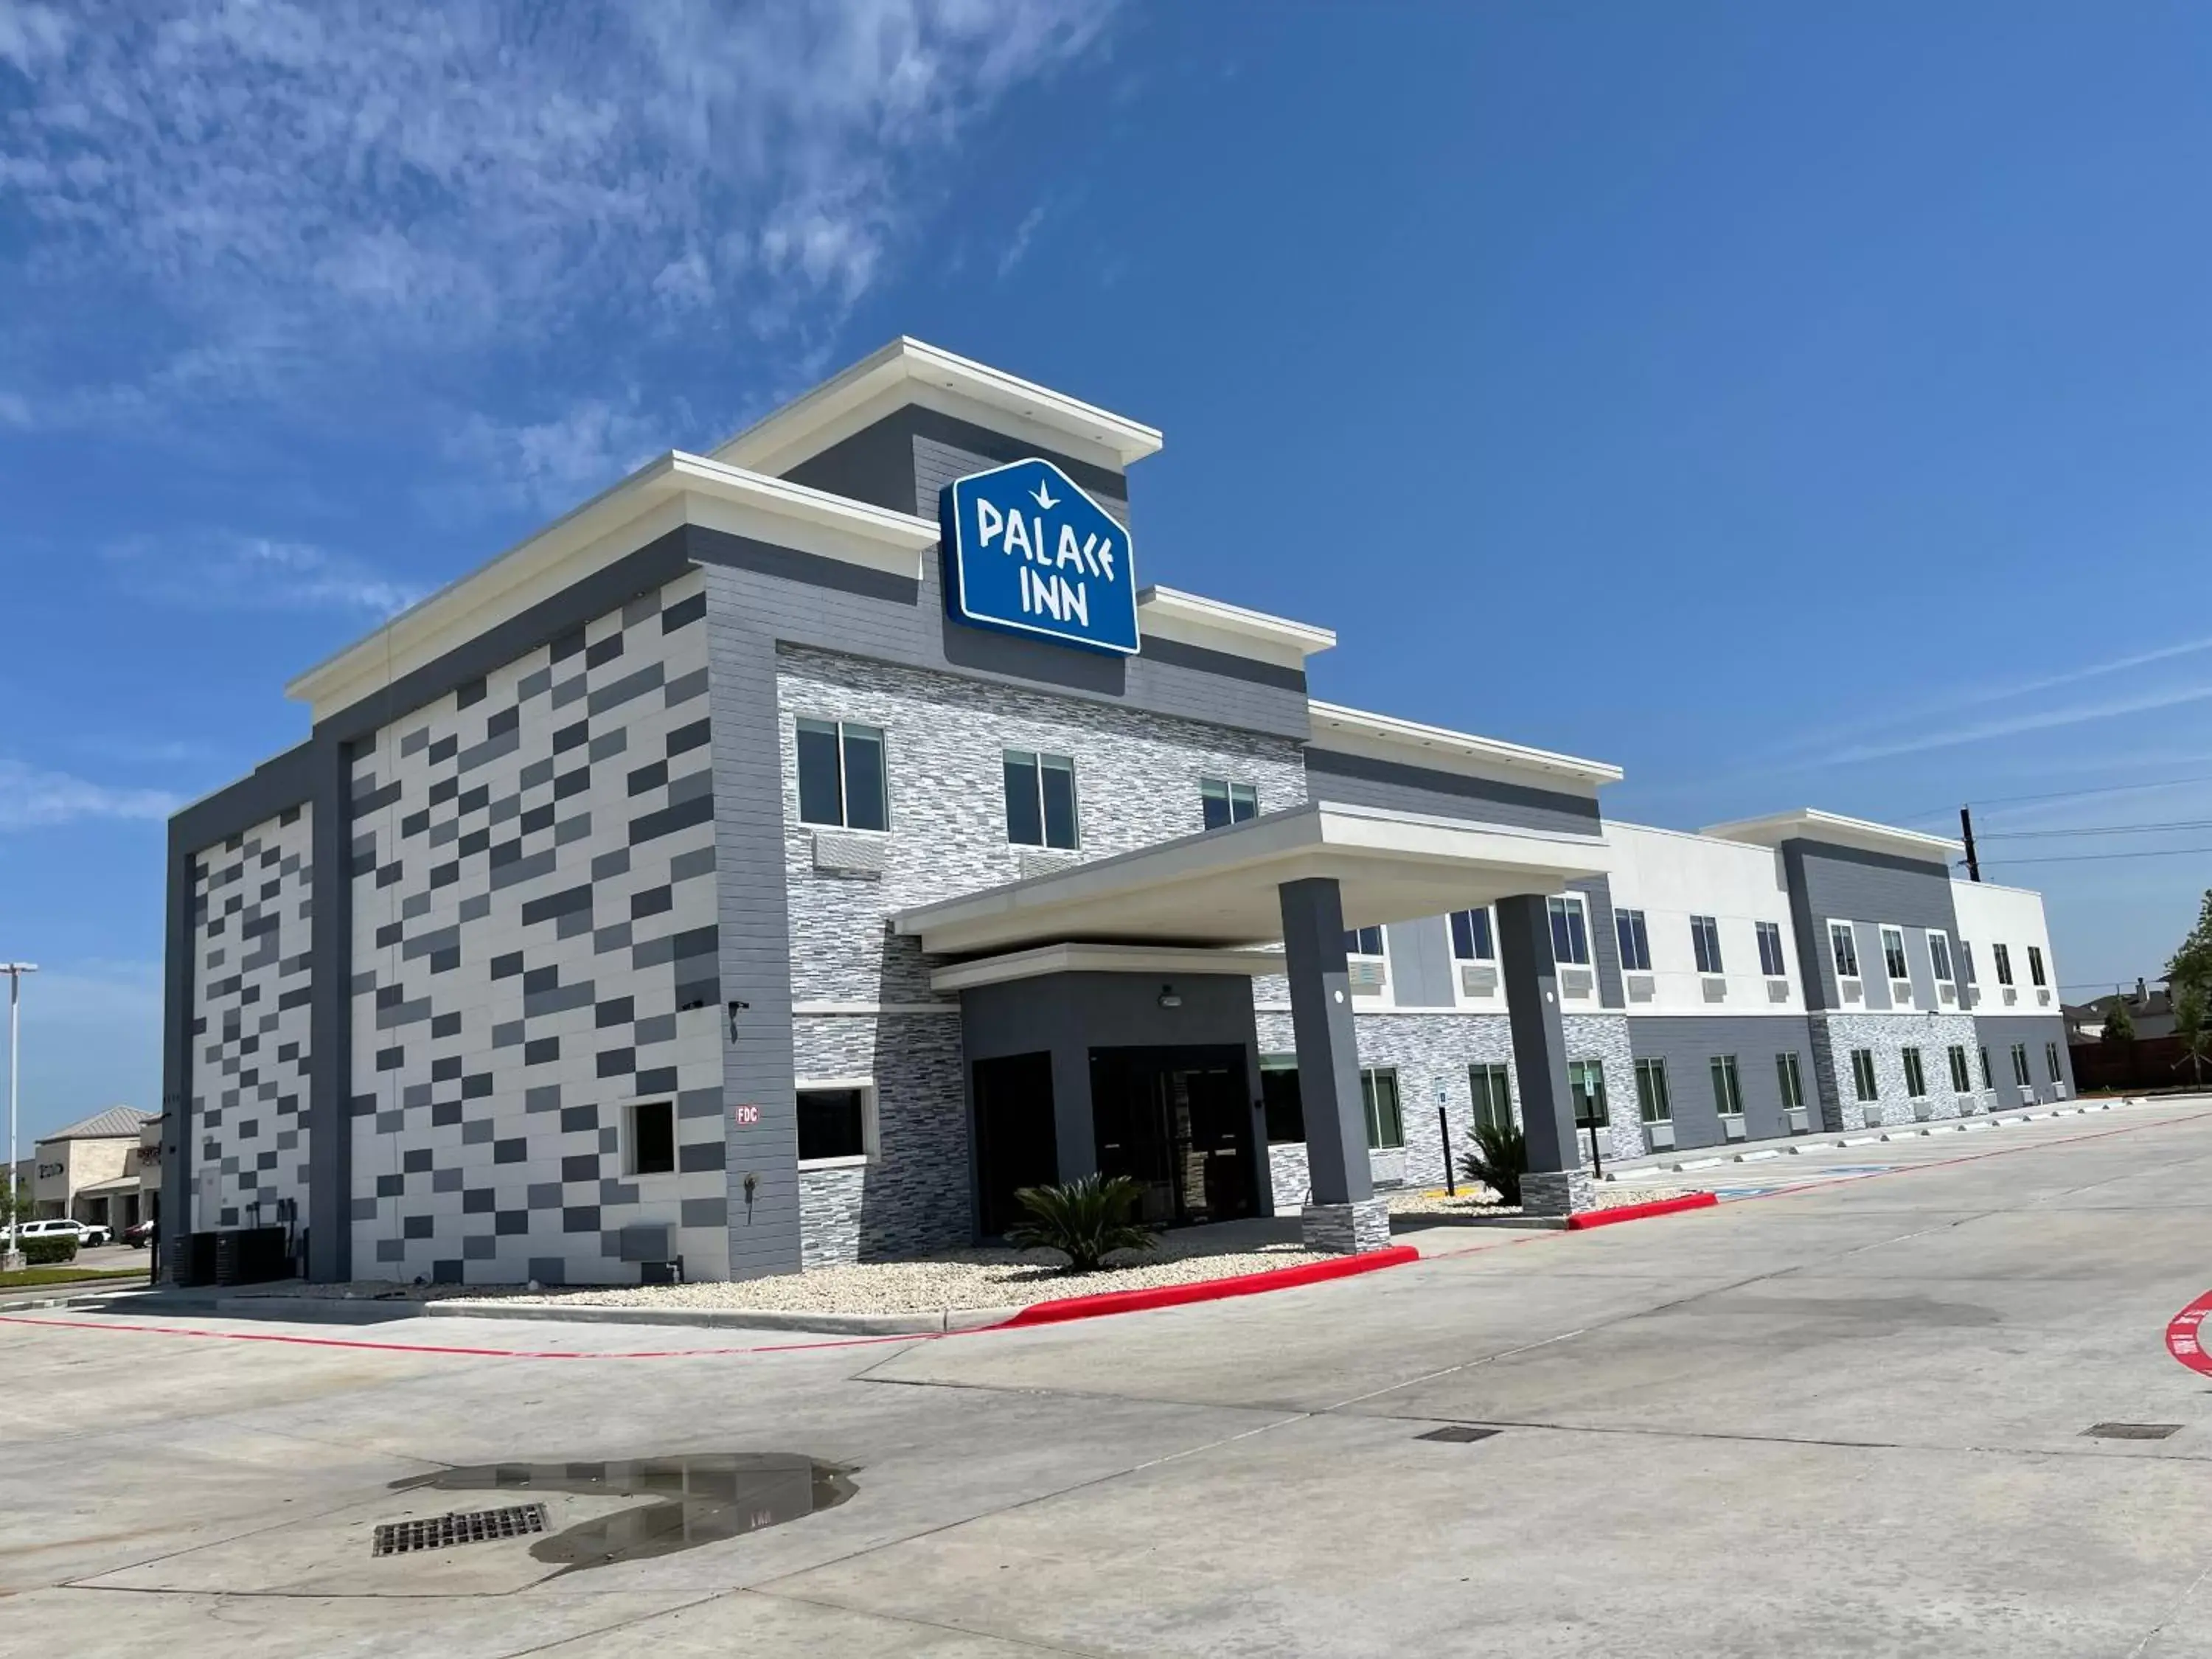 Property building in Palace Inn Blue Houston East Beltway 8